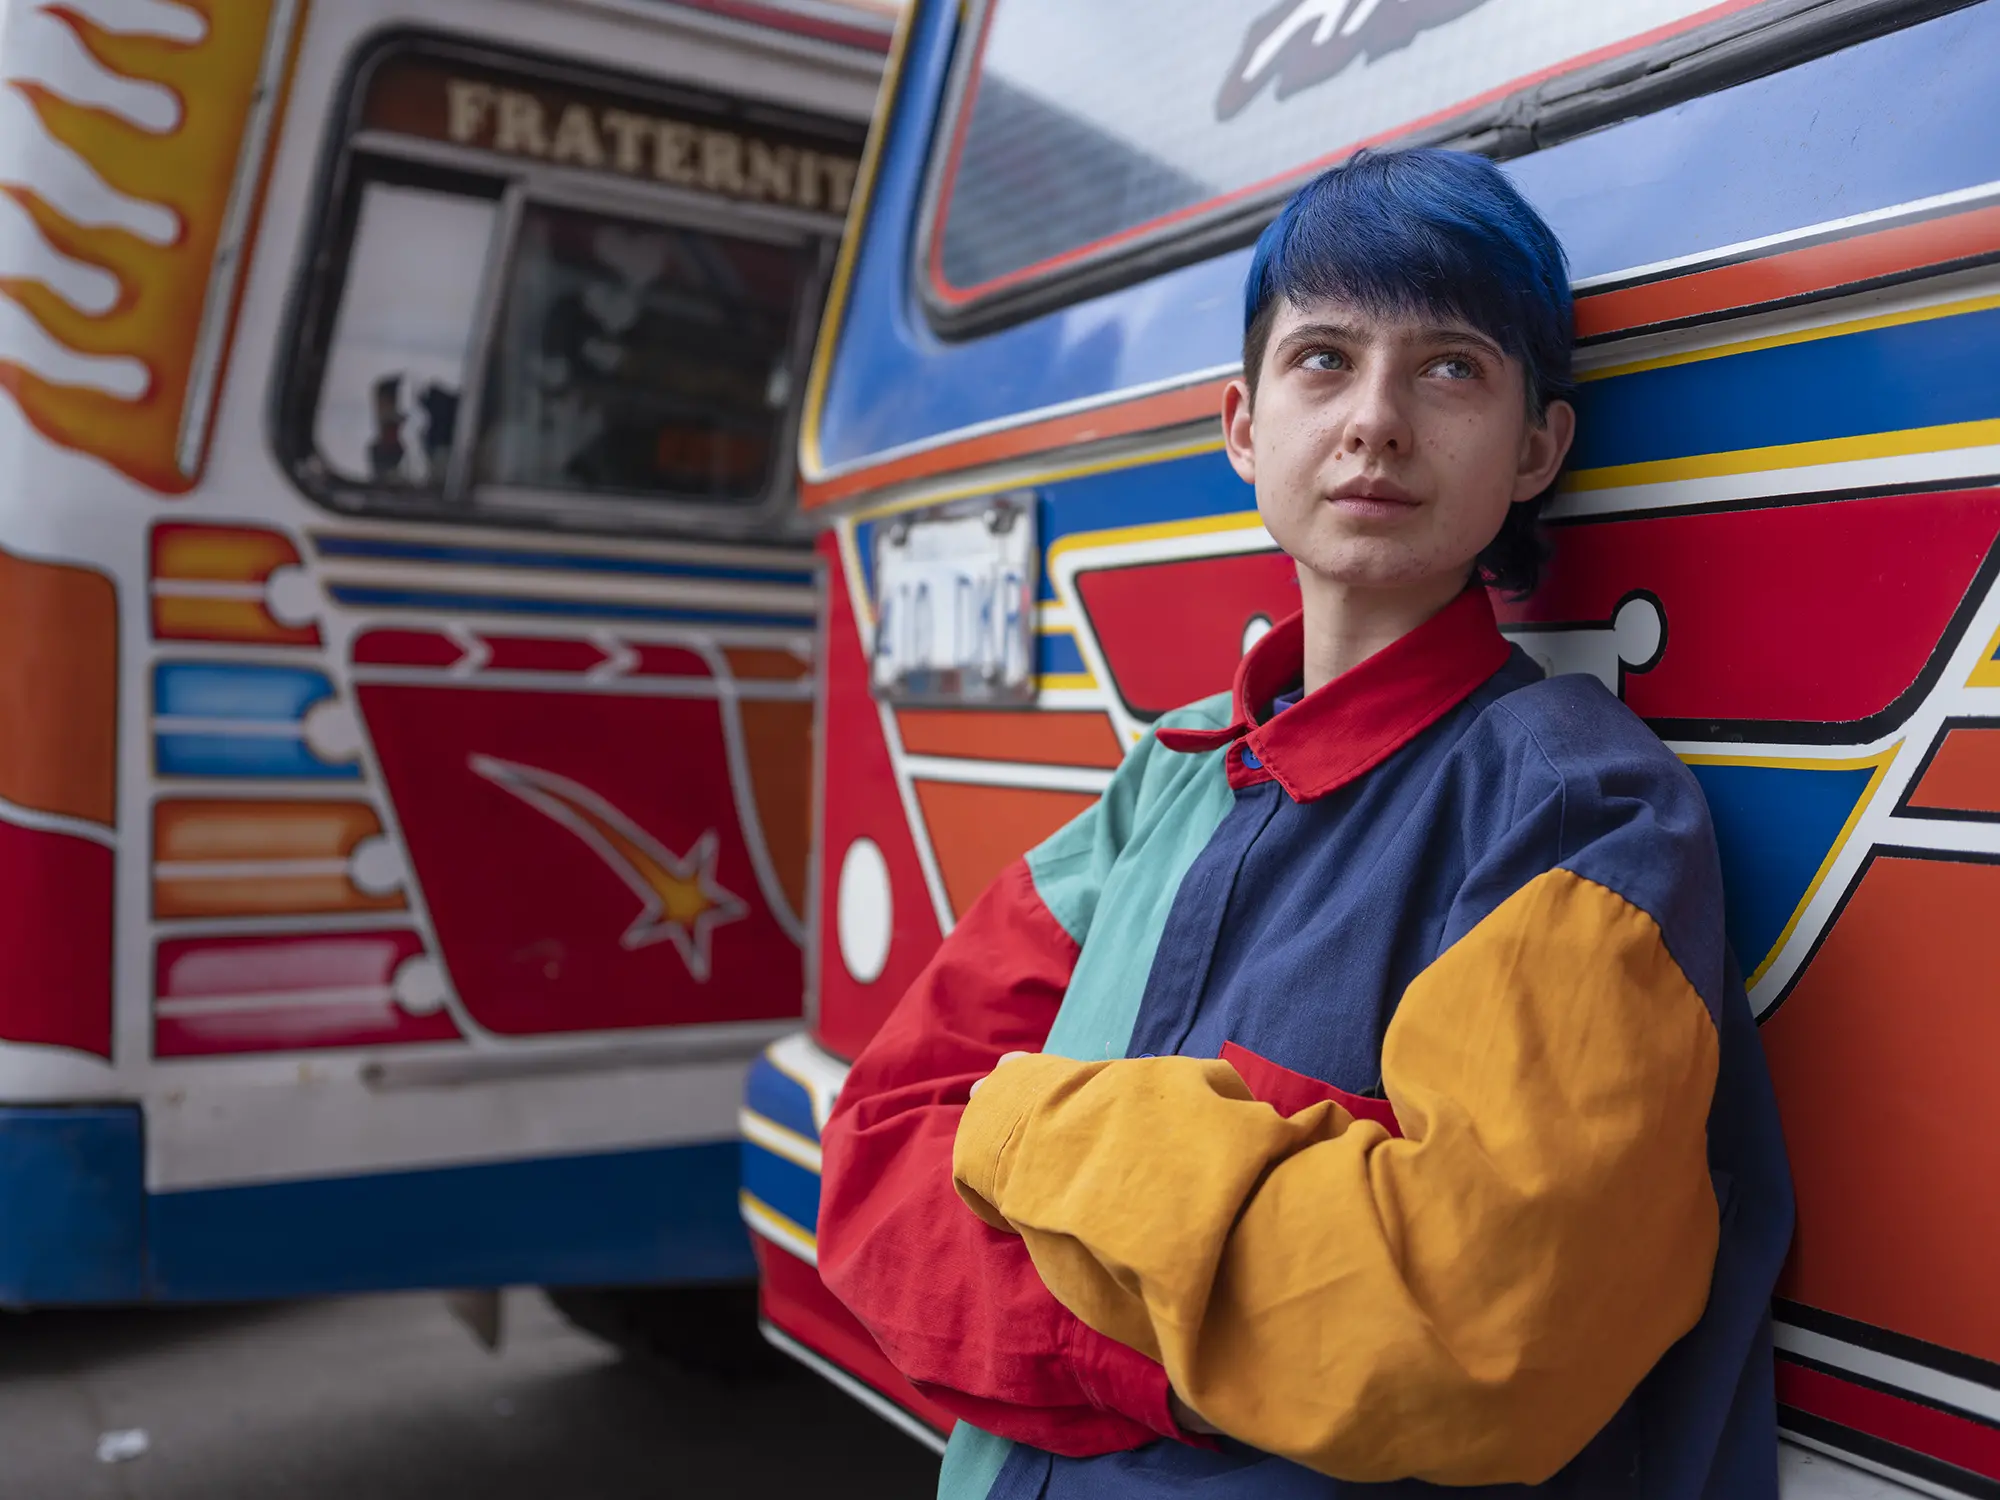 A young person poses next to a bus